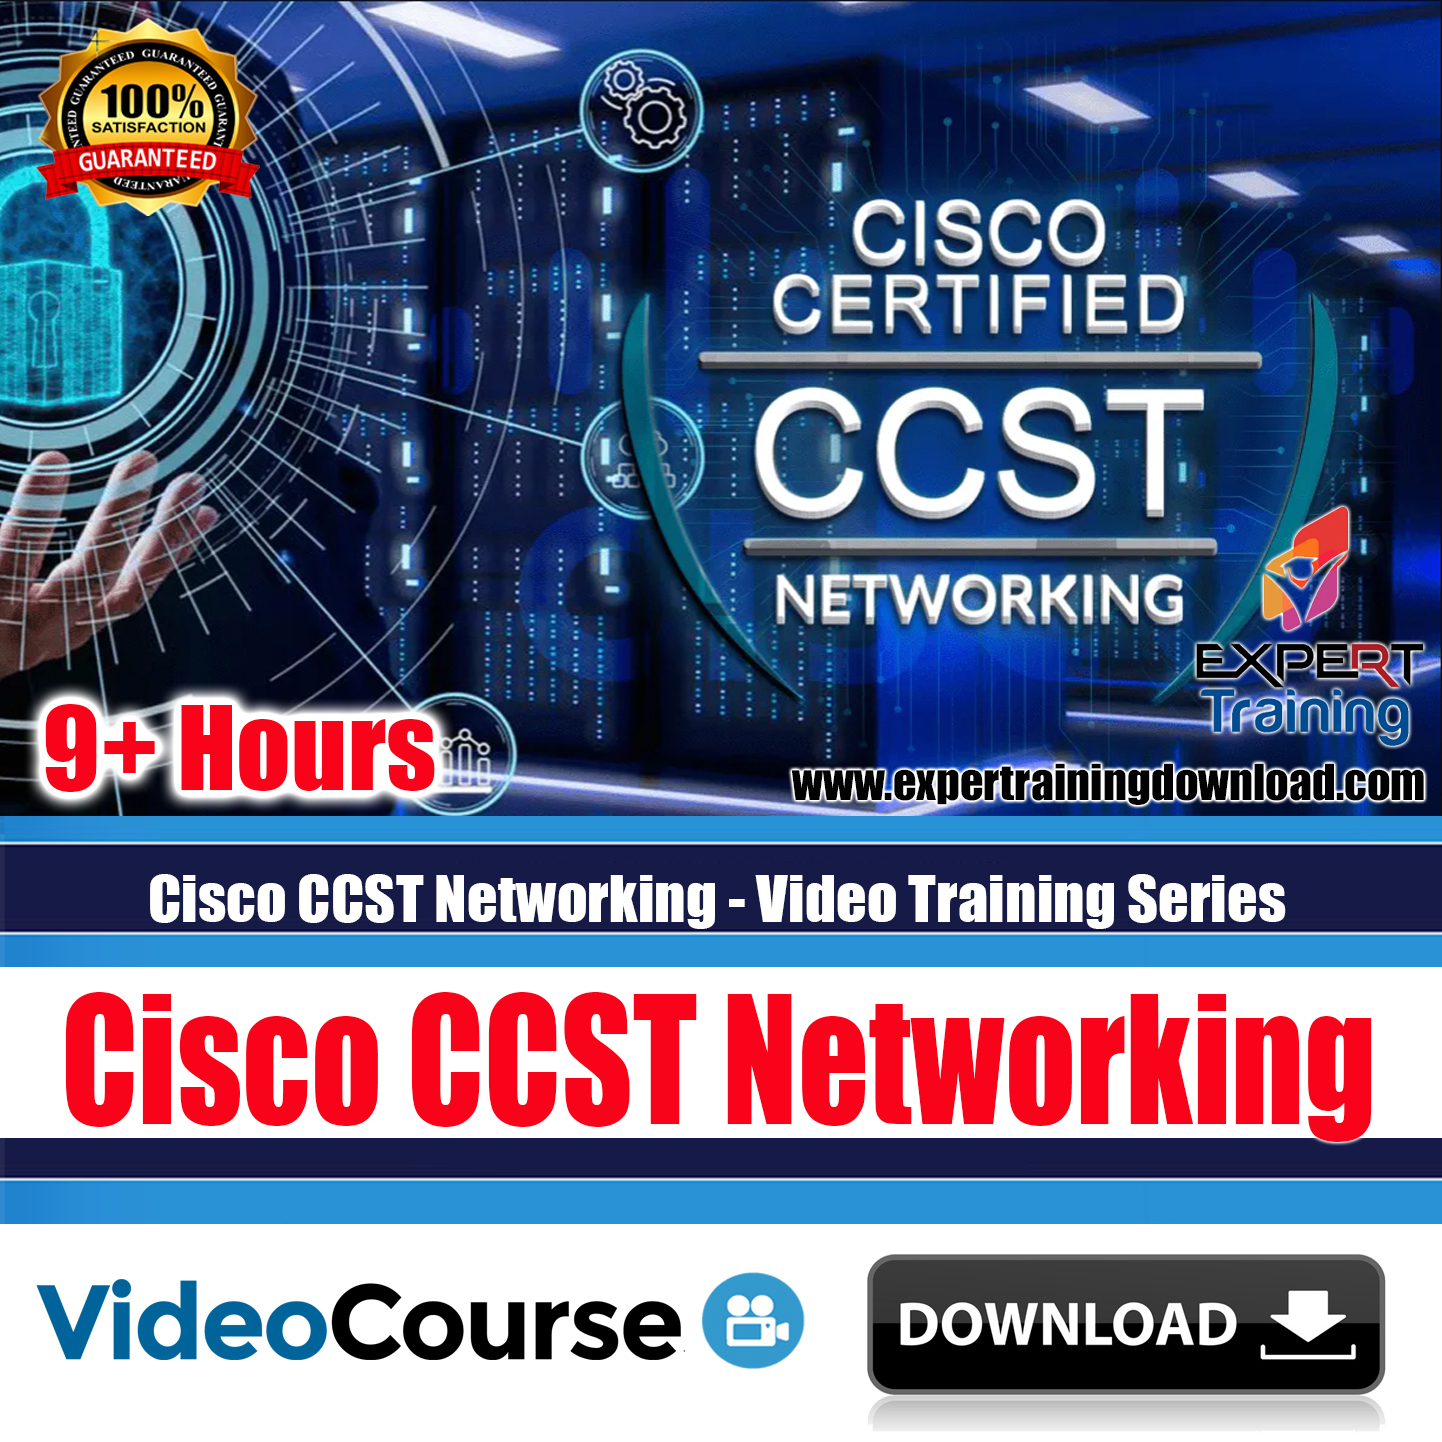 Cisco CCST Networking – Video Training Series